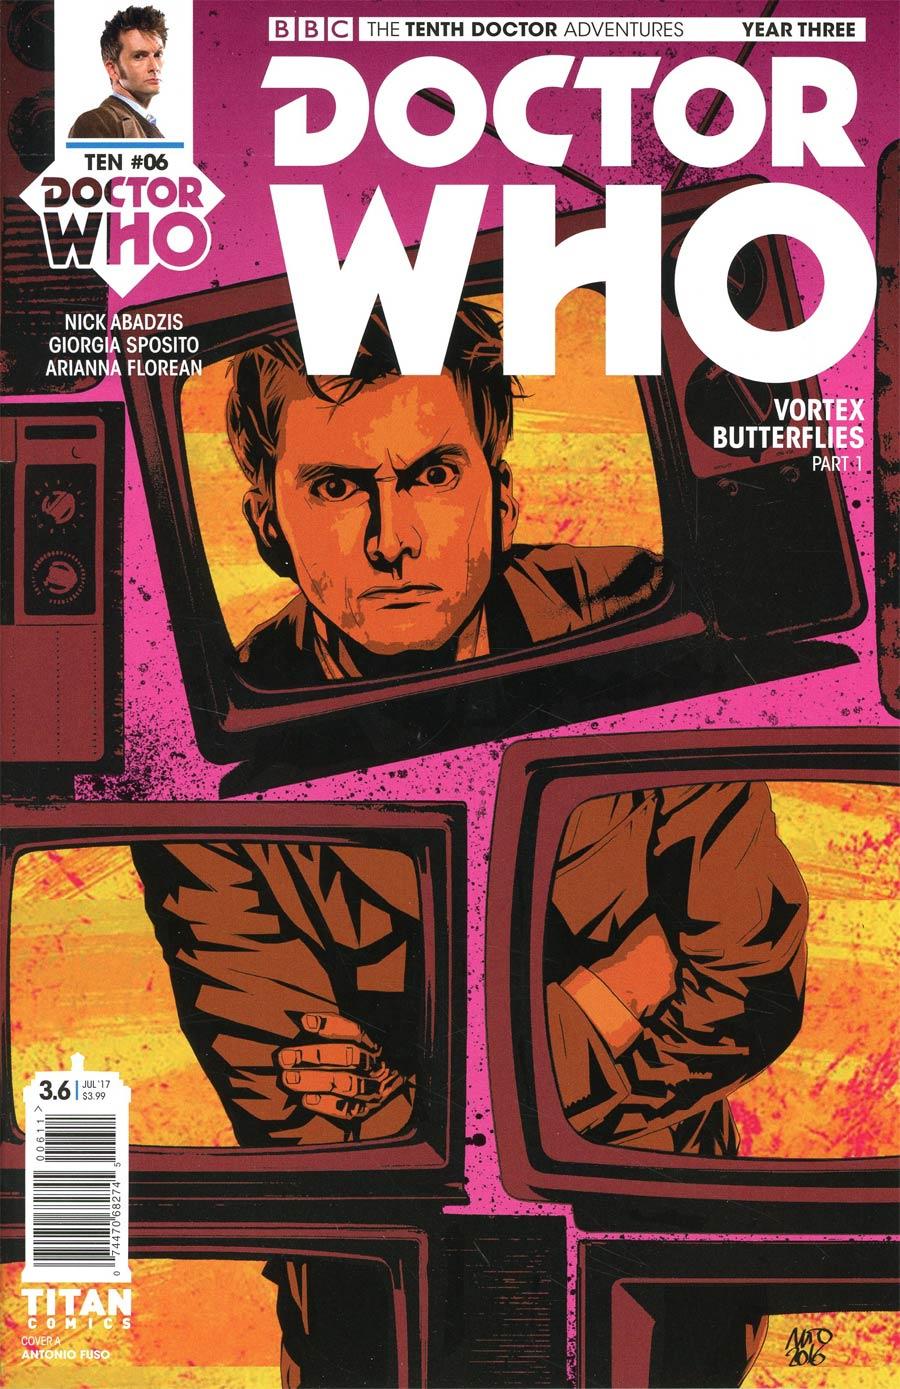 Doctor Who 10th Doctor Year Three Vol. 1 #6